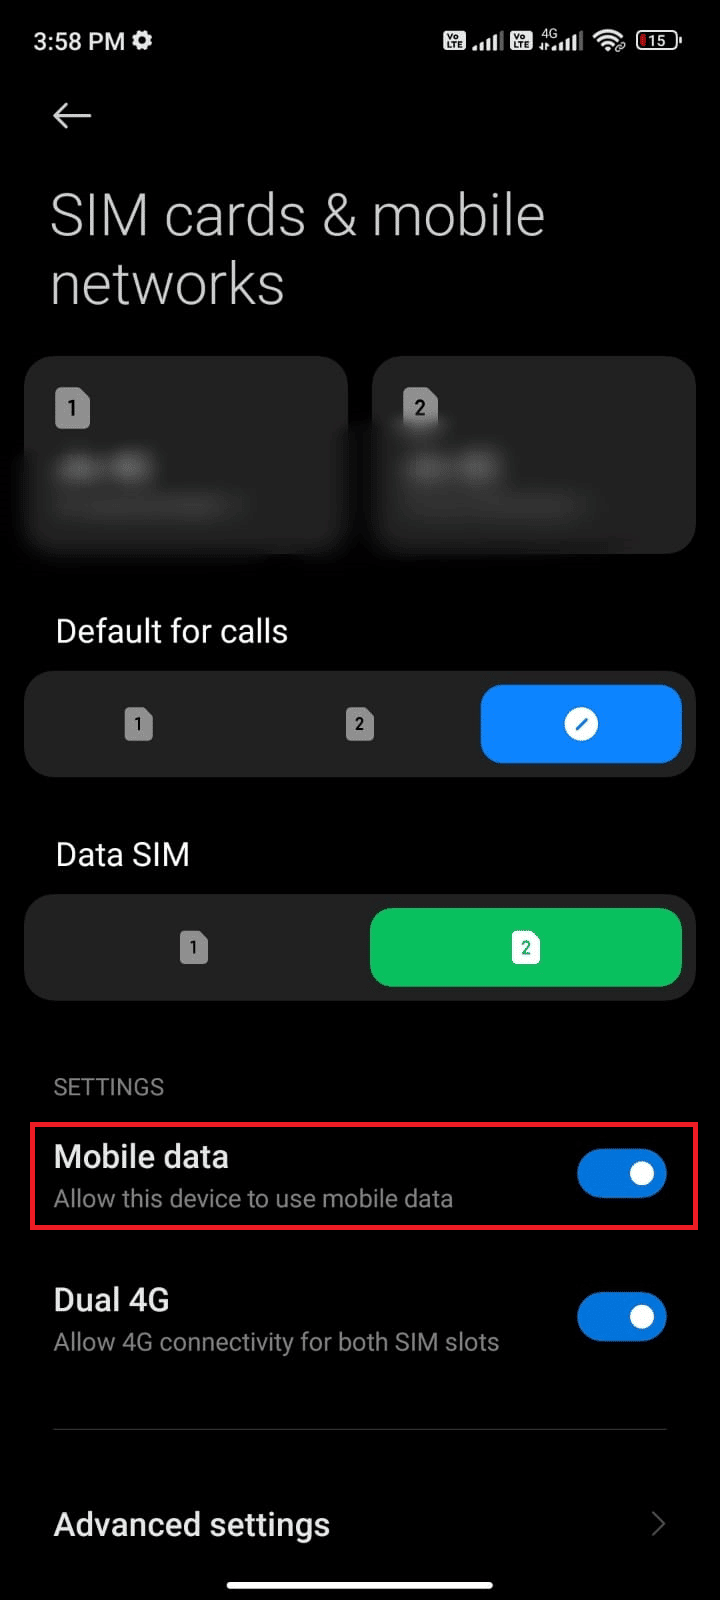 Now, make sure the Mobile data option is turned on